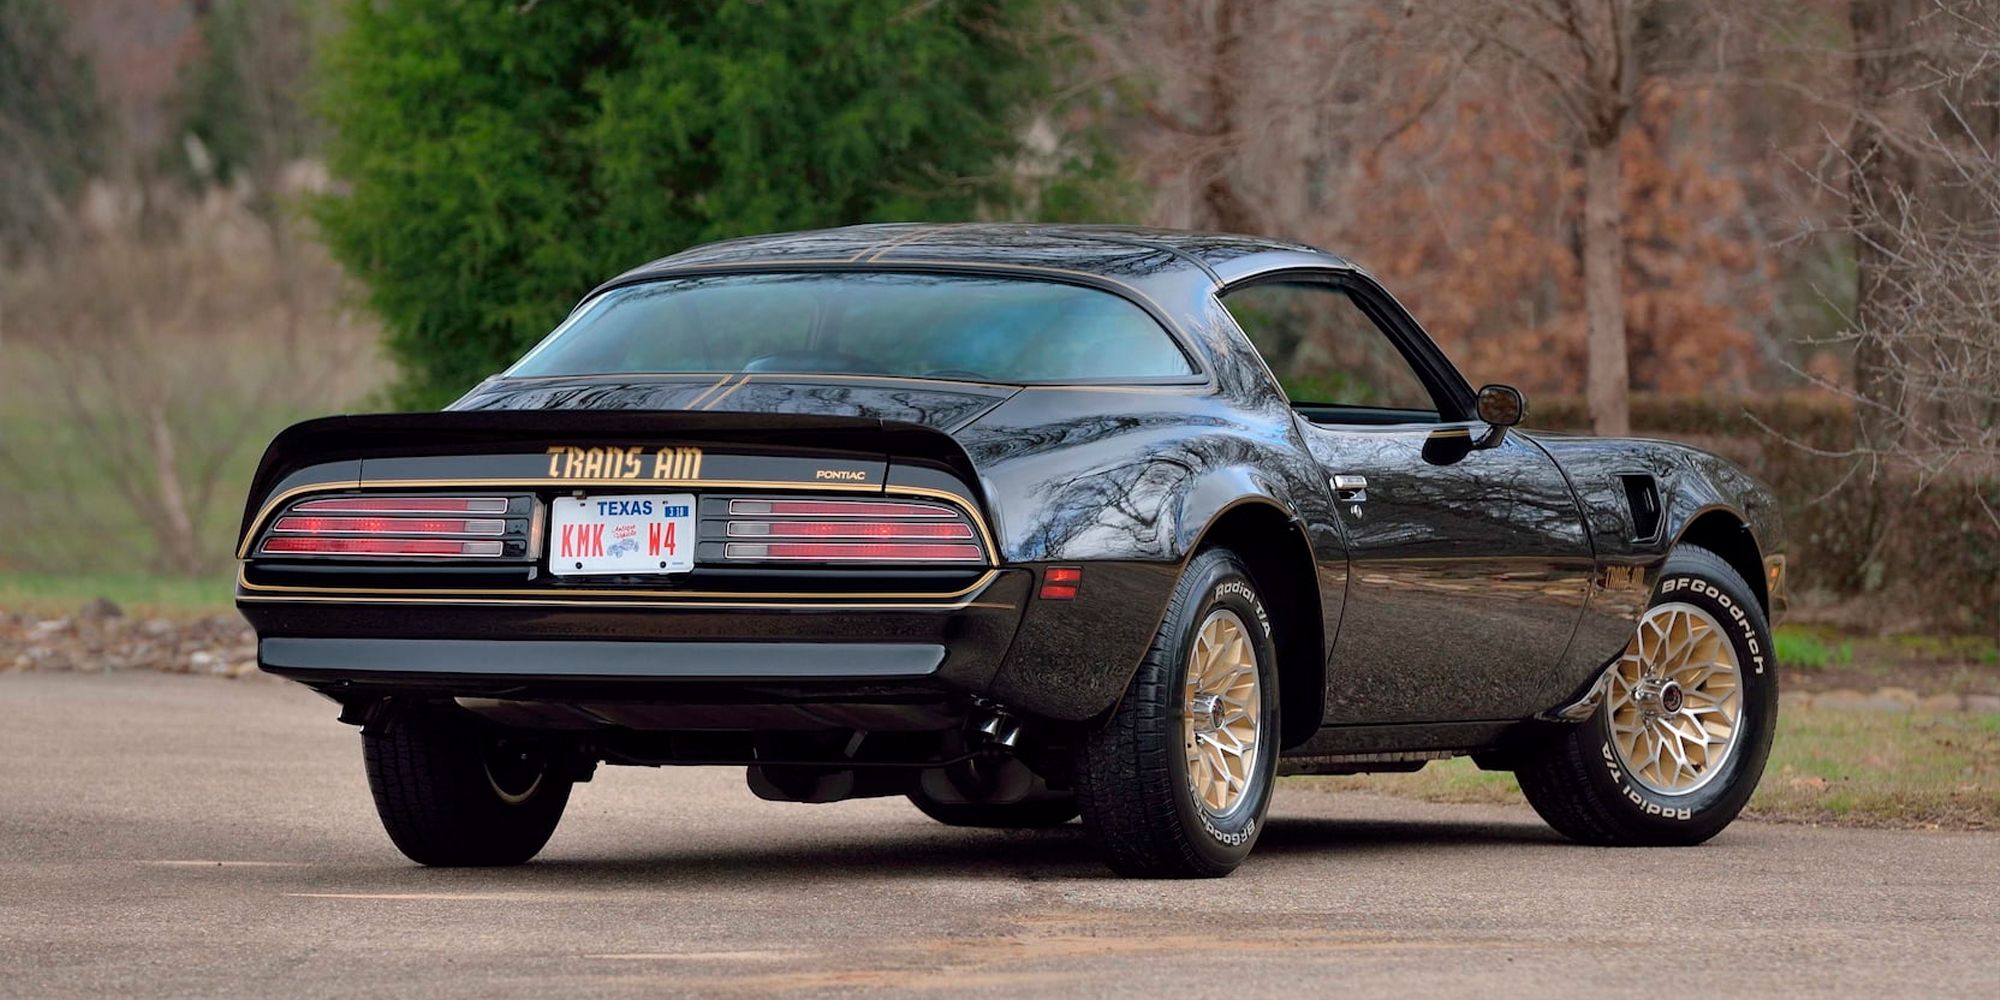 The rear of the '77 Transam